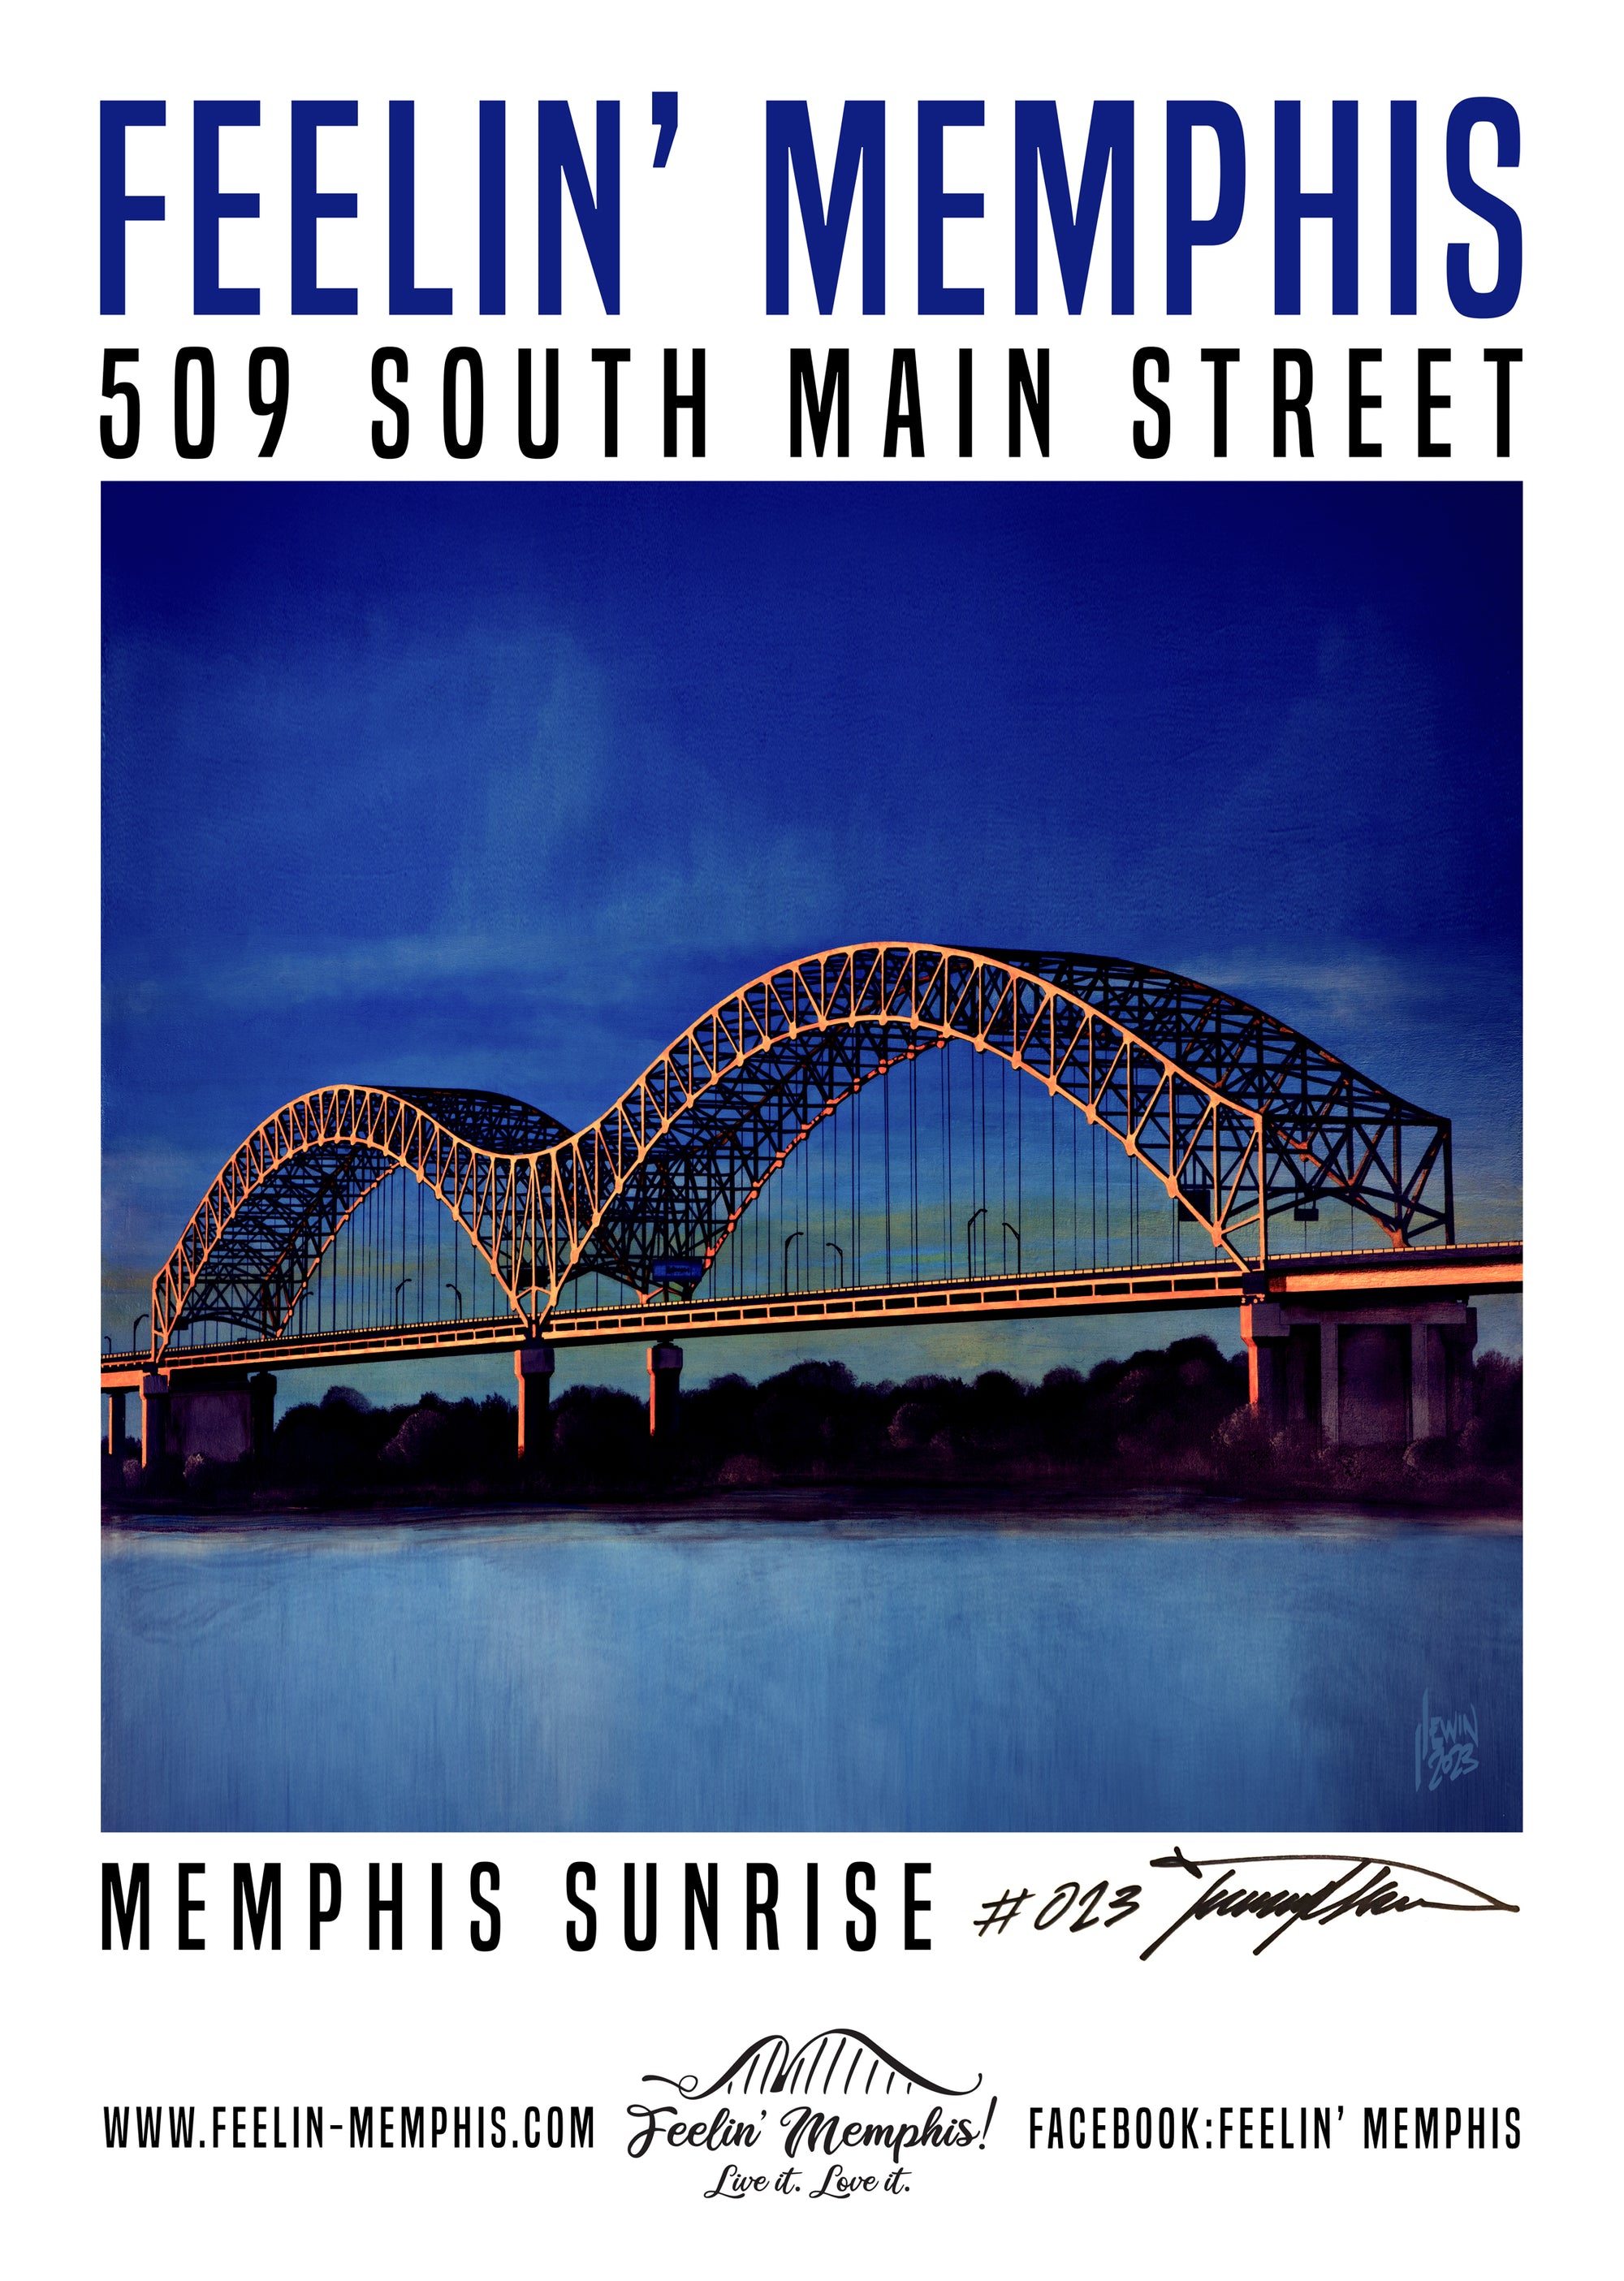 MEMPHIS POSTER in tube by Jeremy Lewin